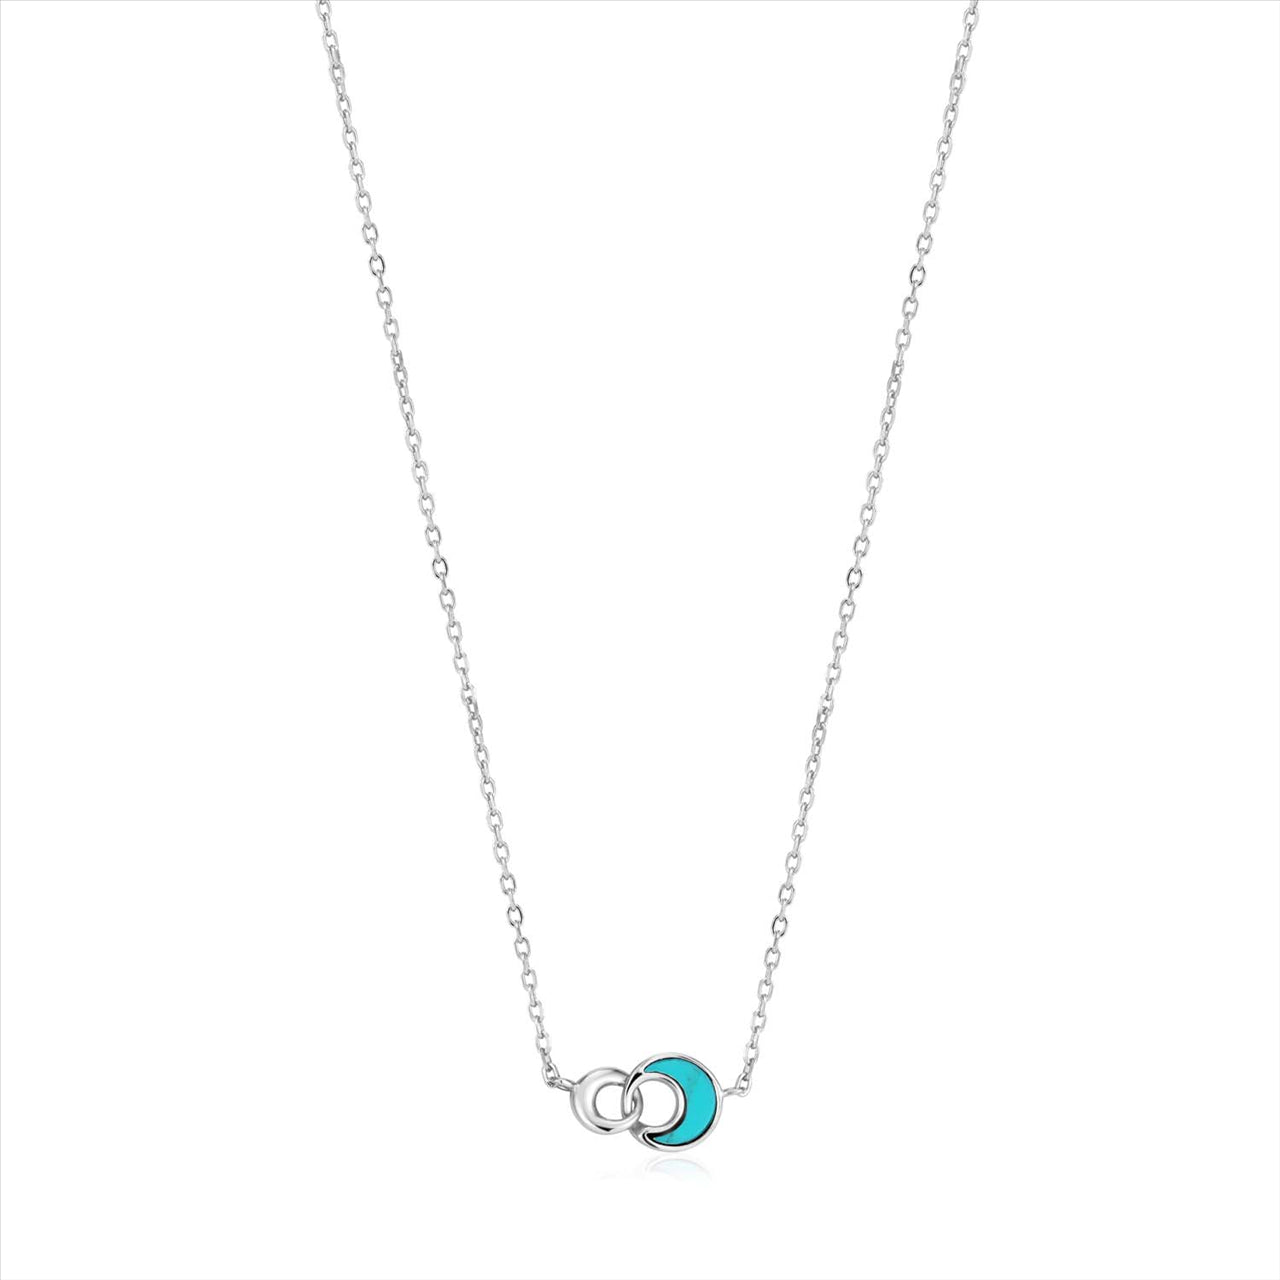 Ania Haie SilverTidal Turquoise Crescent Link Necklace